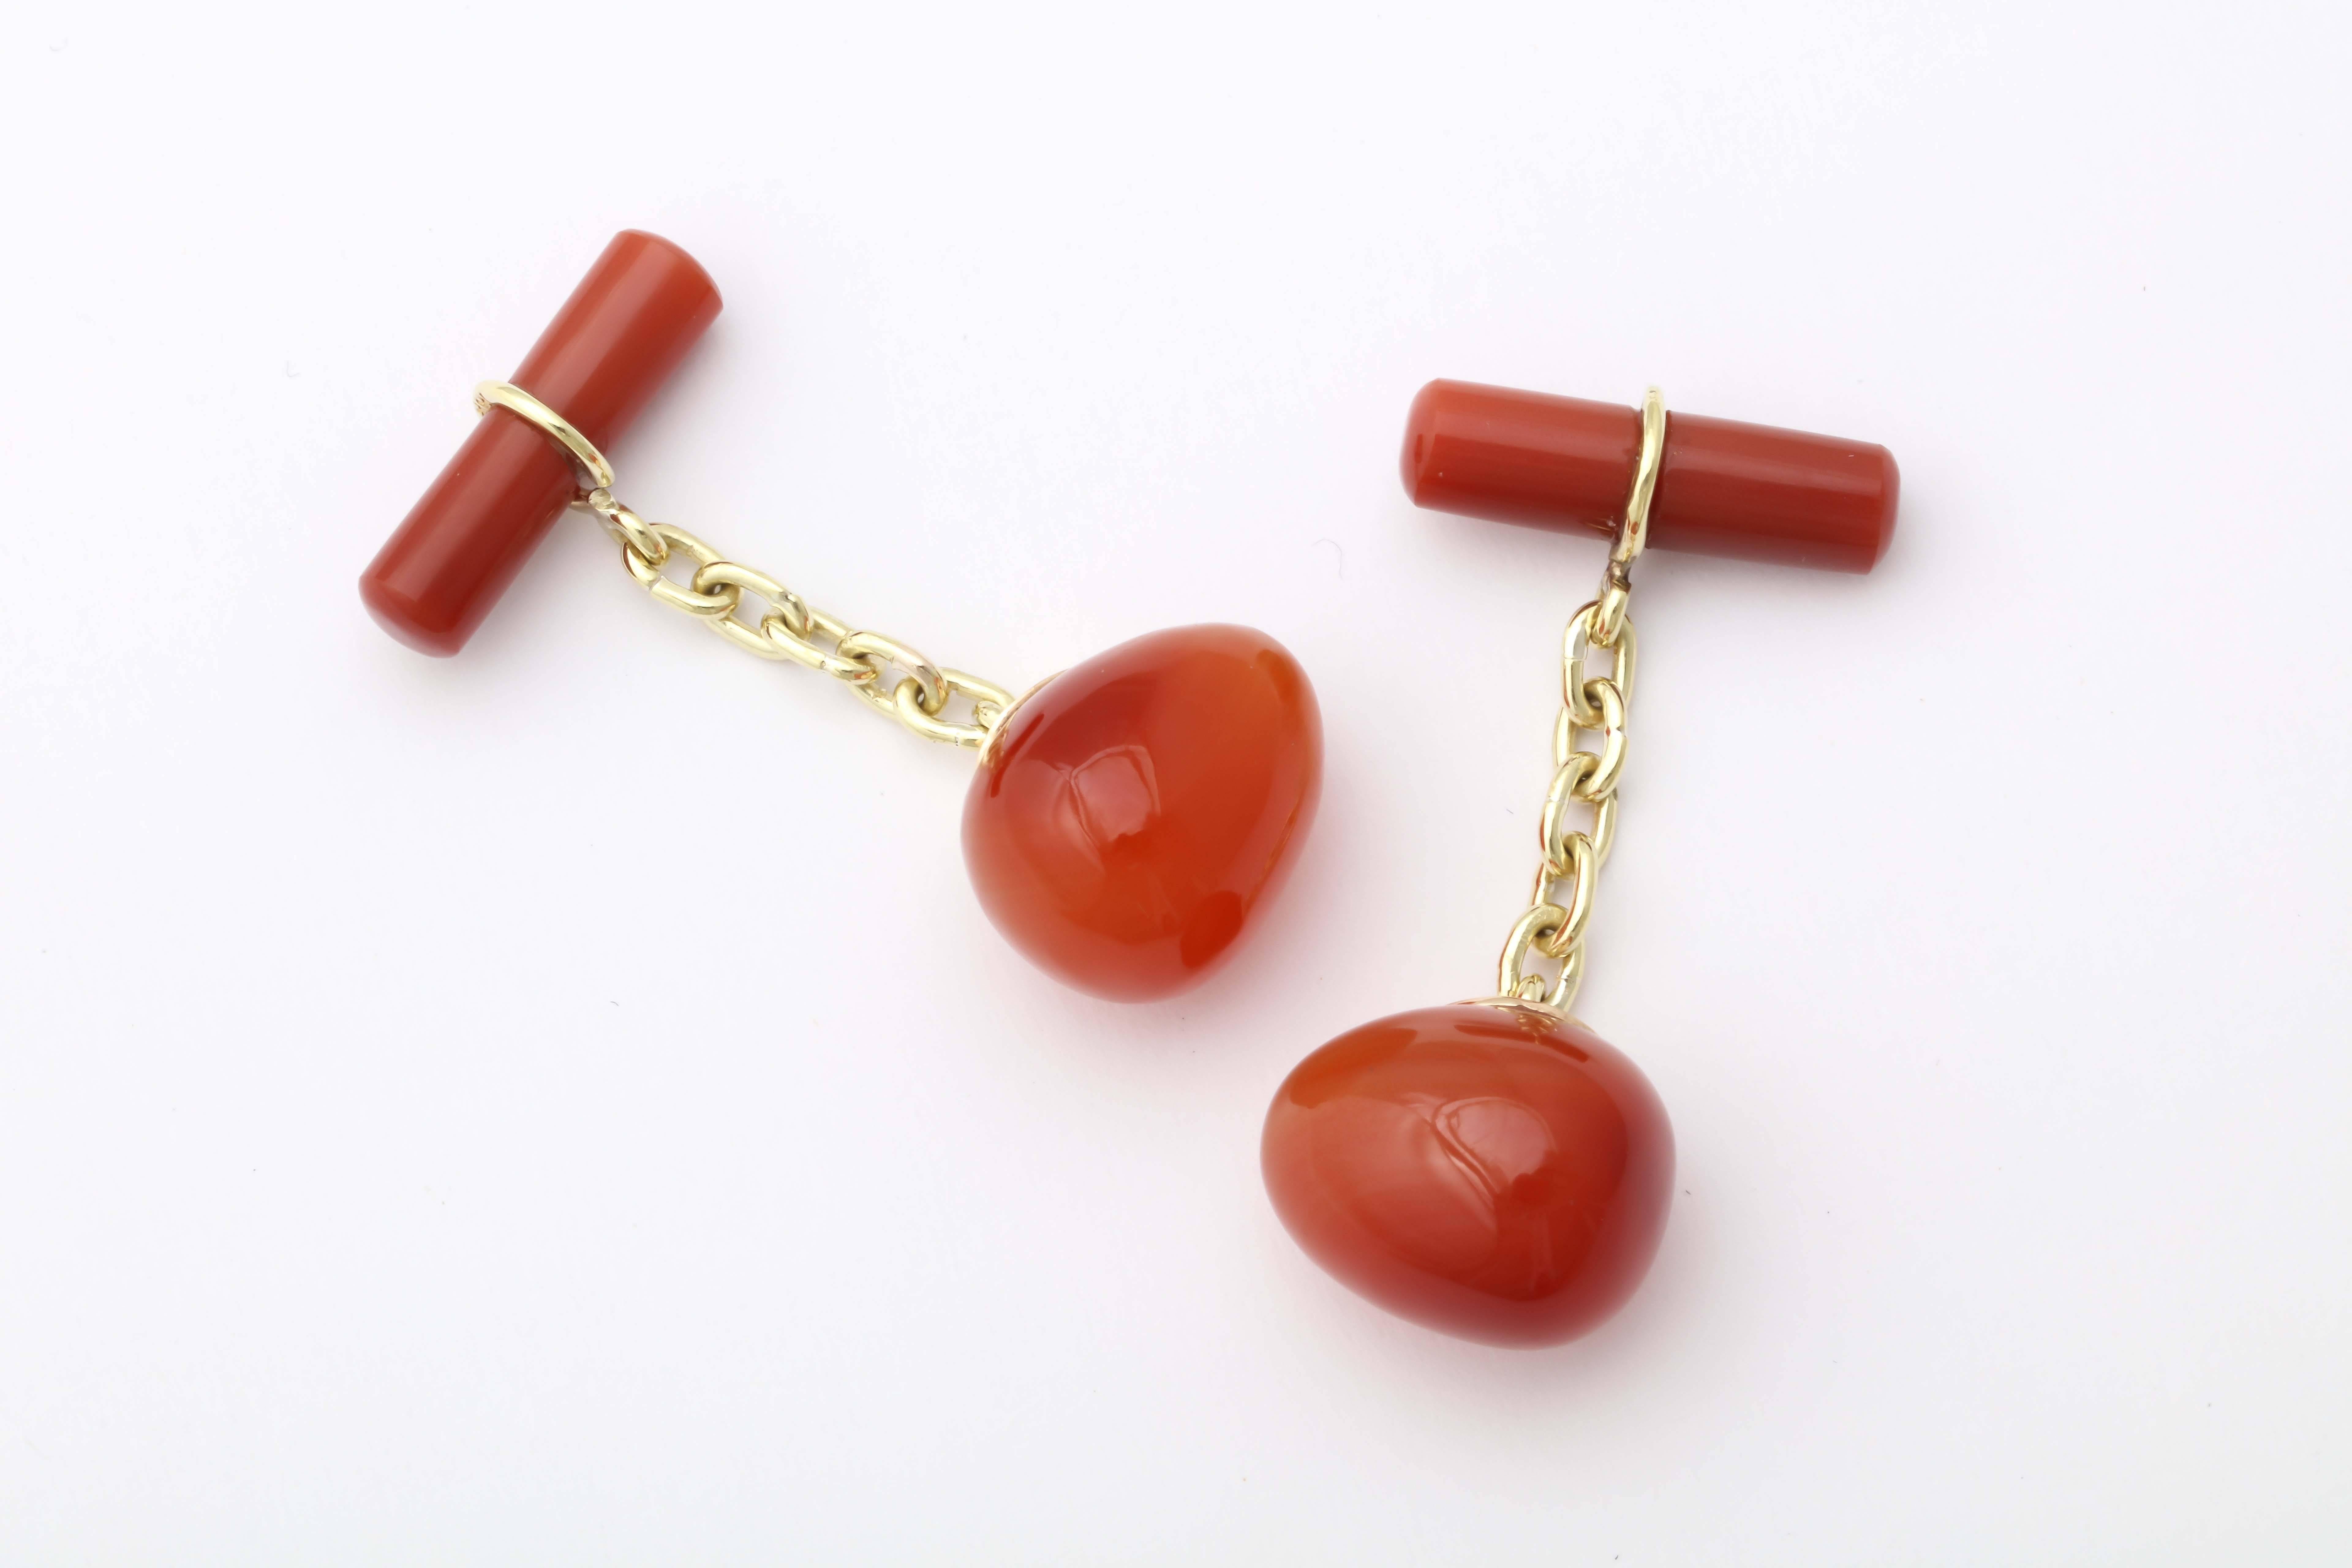 A fine pair of hand-carved egg-shaped carnelian cufflinks based on a Russian design from 1880 by the Fabergé workmaster, Erik Kollin. The well-matched orange carnelian links recall the highest quality Russian indigenous stone used in Fabergé animal